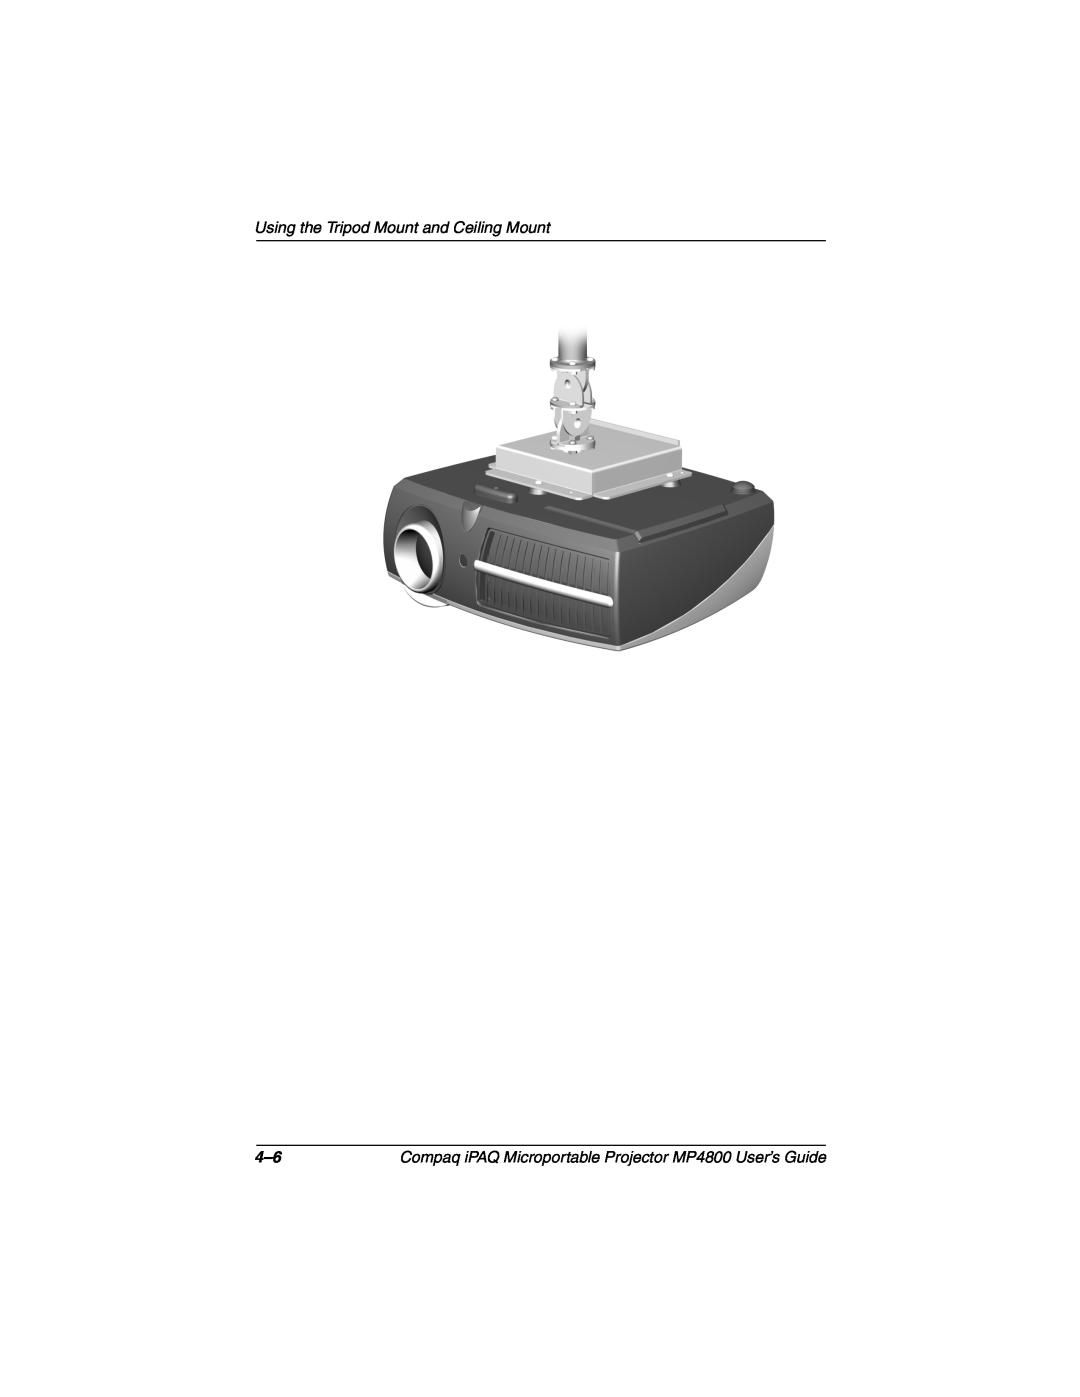 Compaq manual Using the Tripod Mount and Ceiling Mount, Compaq iPAQ Microportable Projector MP4800 User’s Guide 